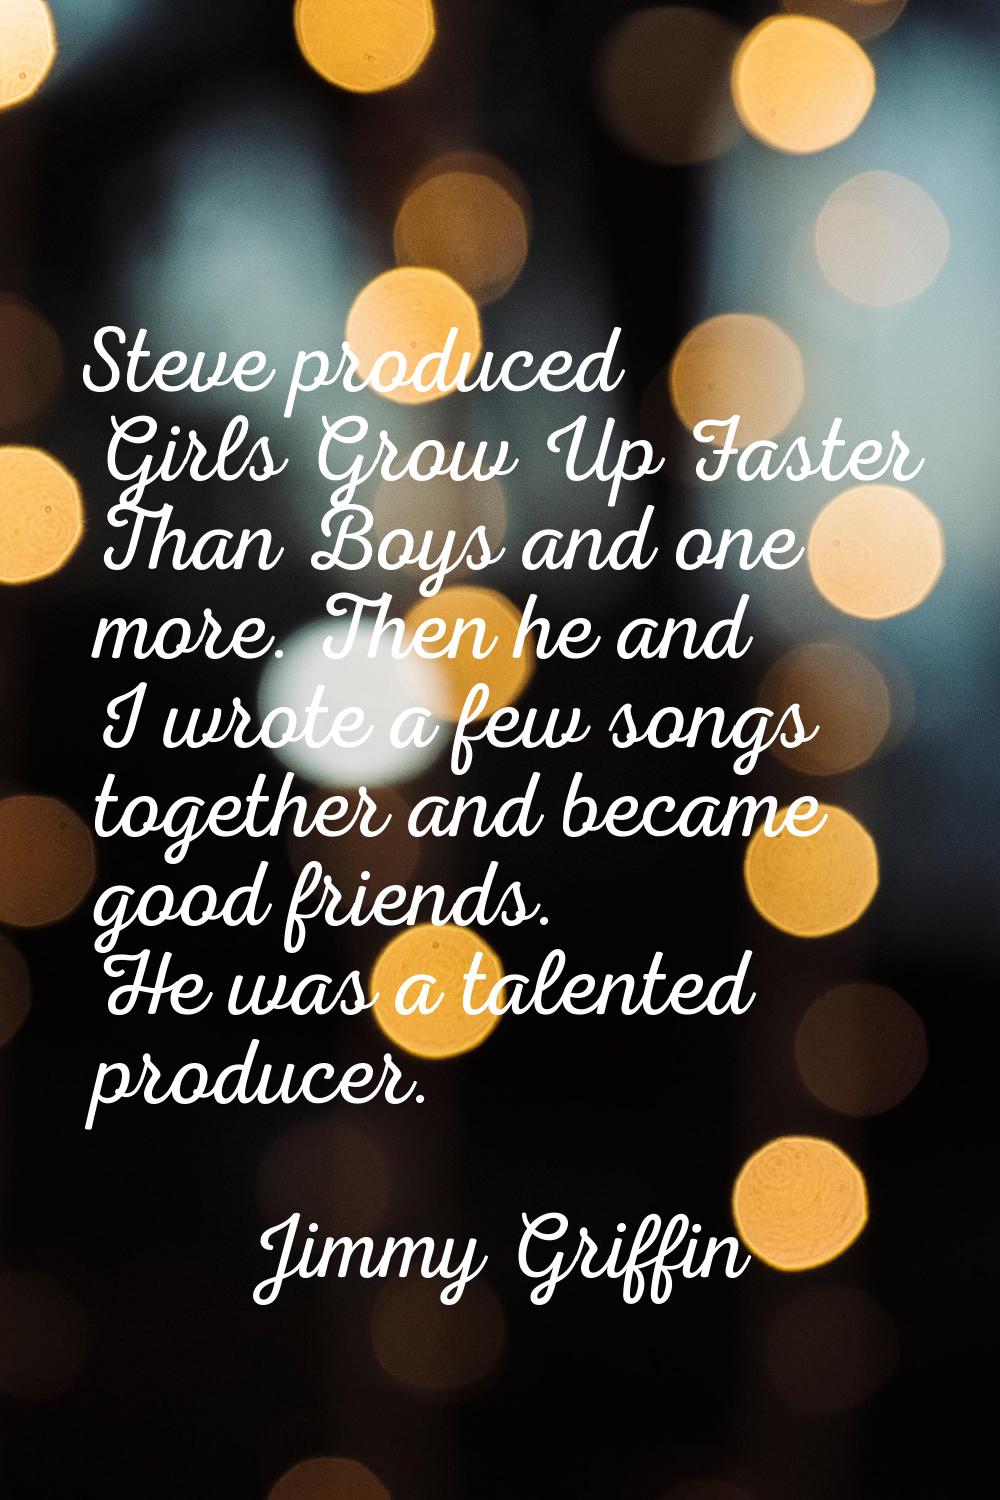 Steve produced Girls Grow Up Faster Than Boys and one more. Then he and I wrote a few songs togethe